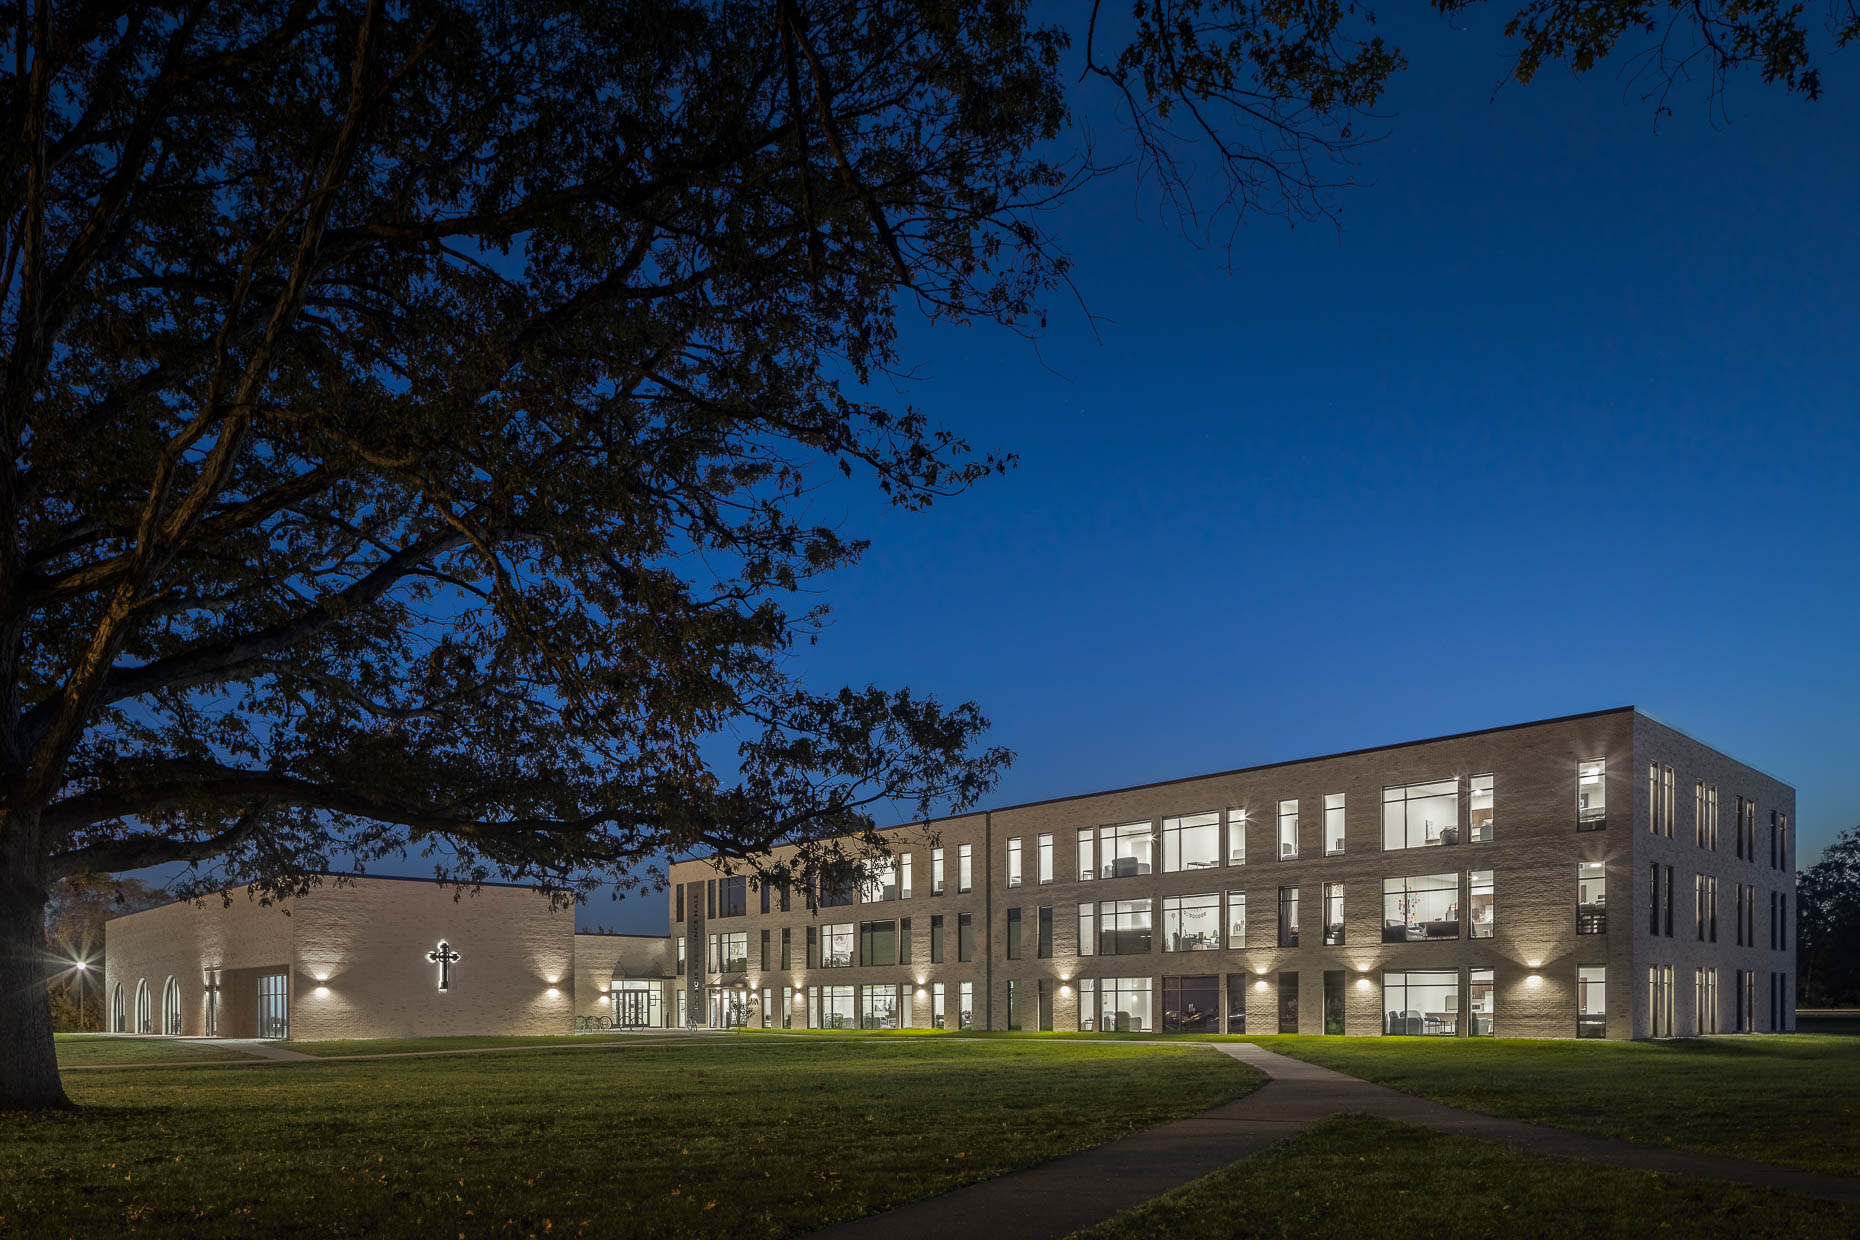 SMWC Les Bois Hall by MKC Architects photographed by Lauren K Davis based in Columbus, Ohio